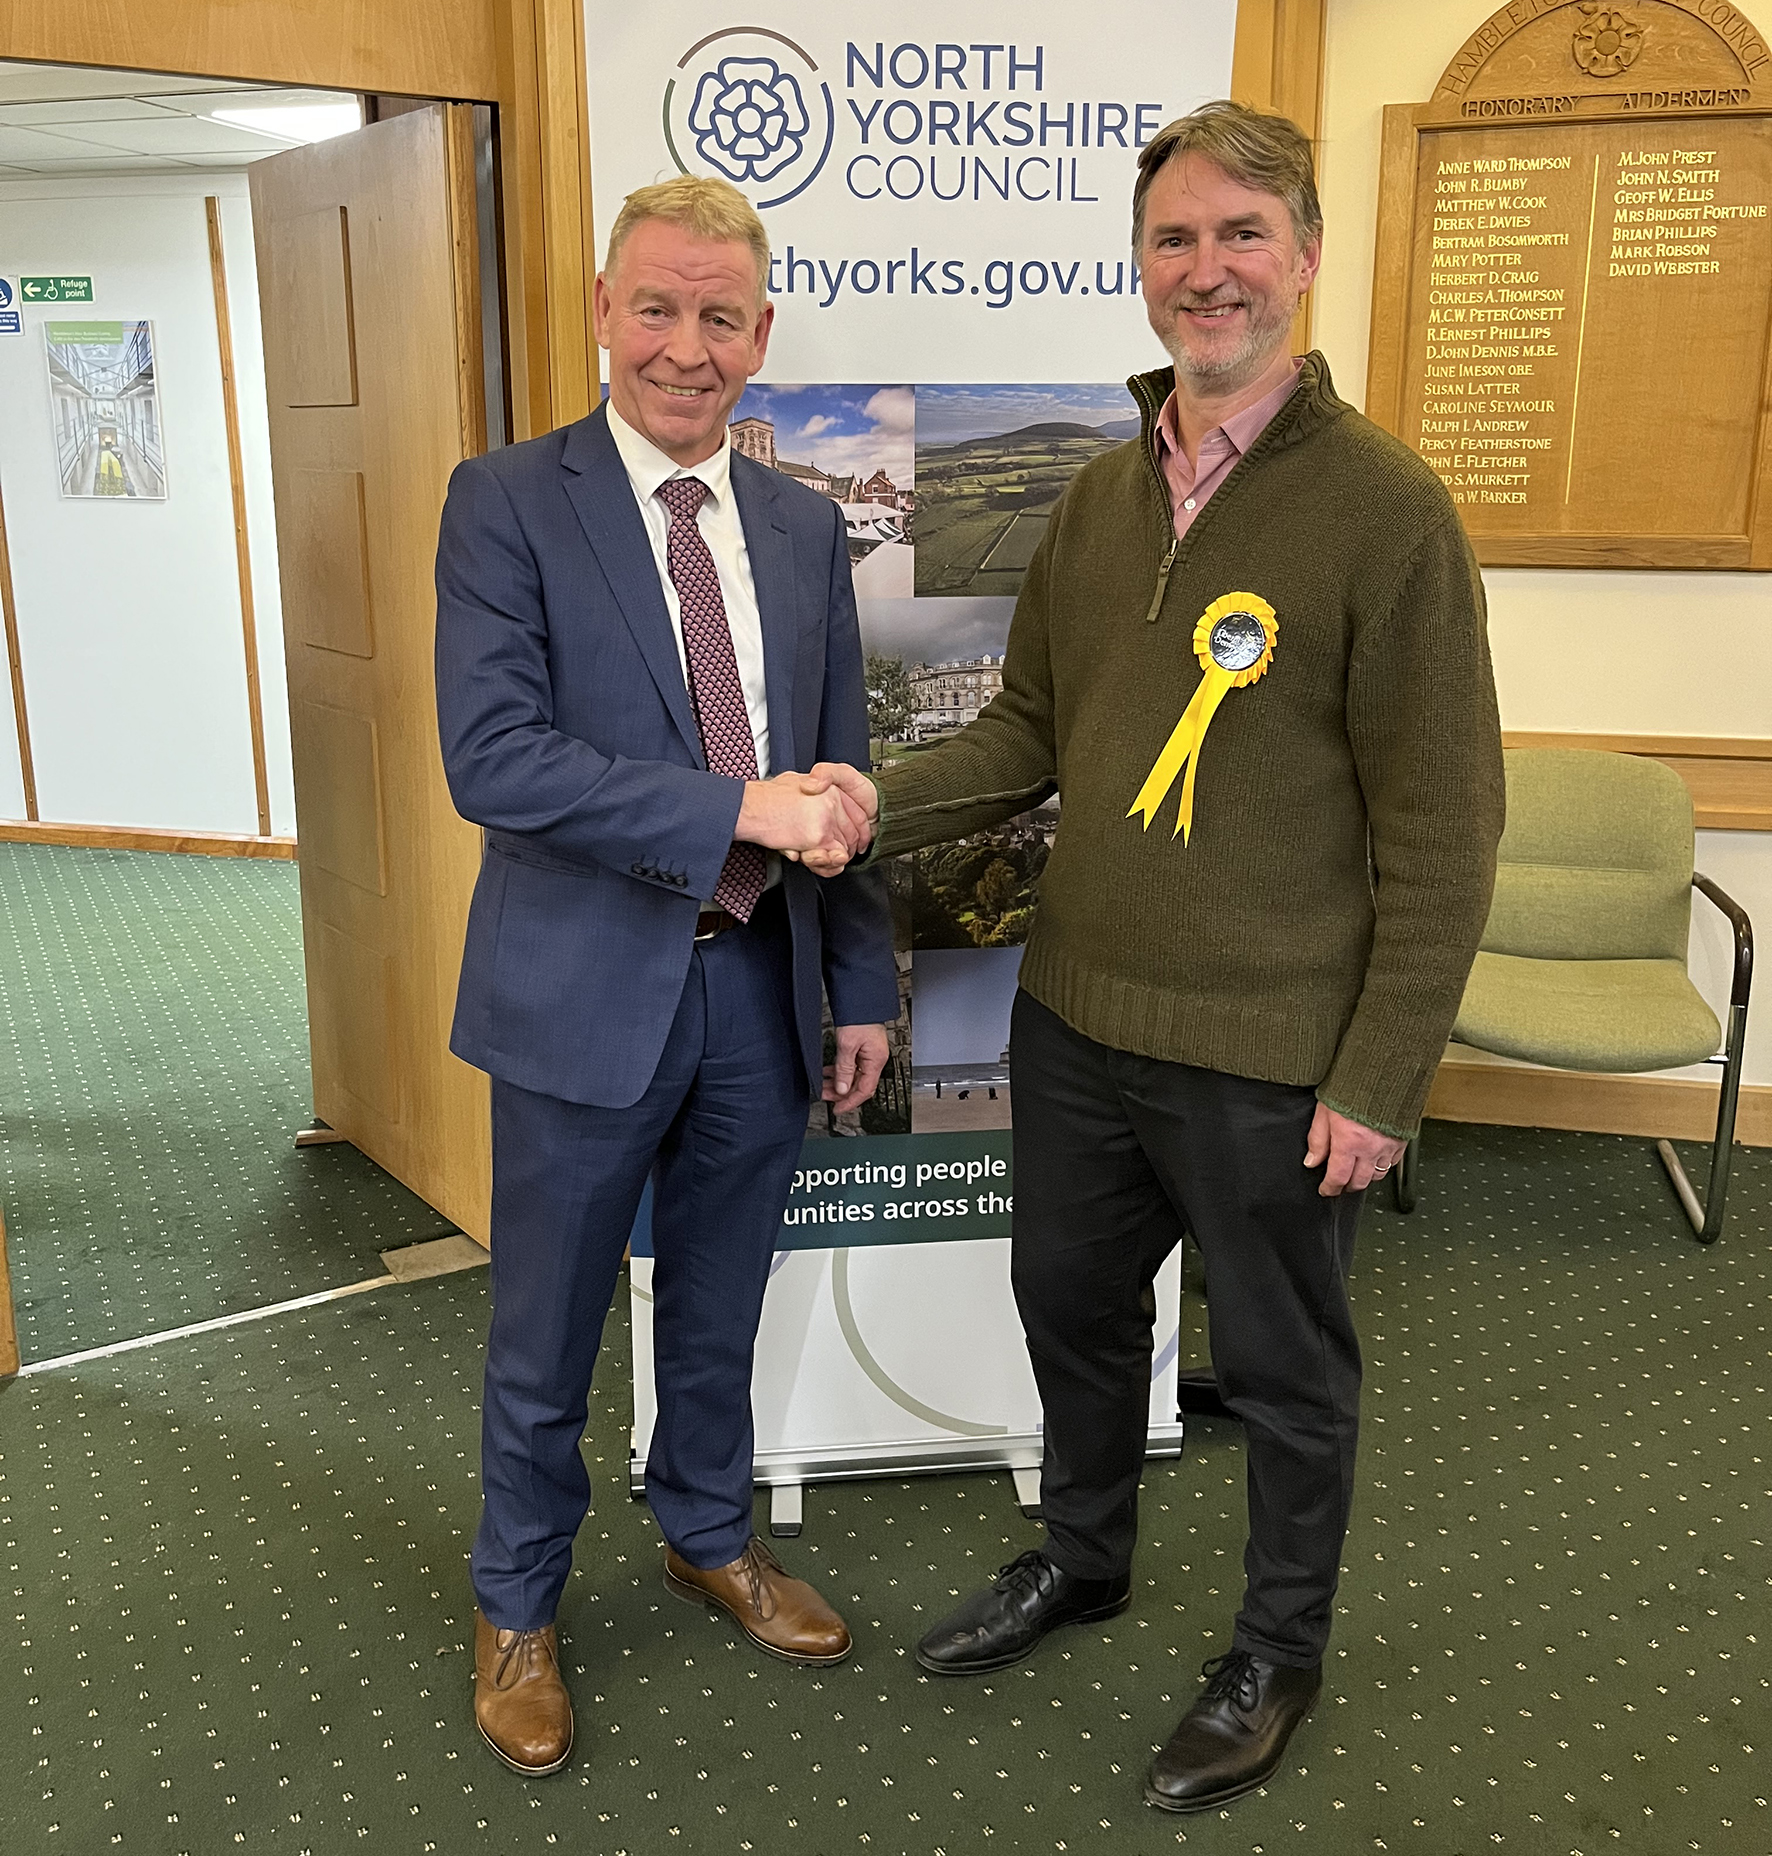 Dan Sladden, right, the winner of the Sowerby and Topcliffe by-election, with returning officer Richard Flinton, who is the chief executive of North Yorkshire Council.